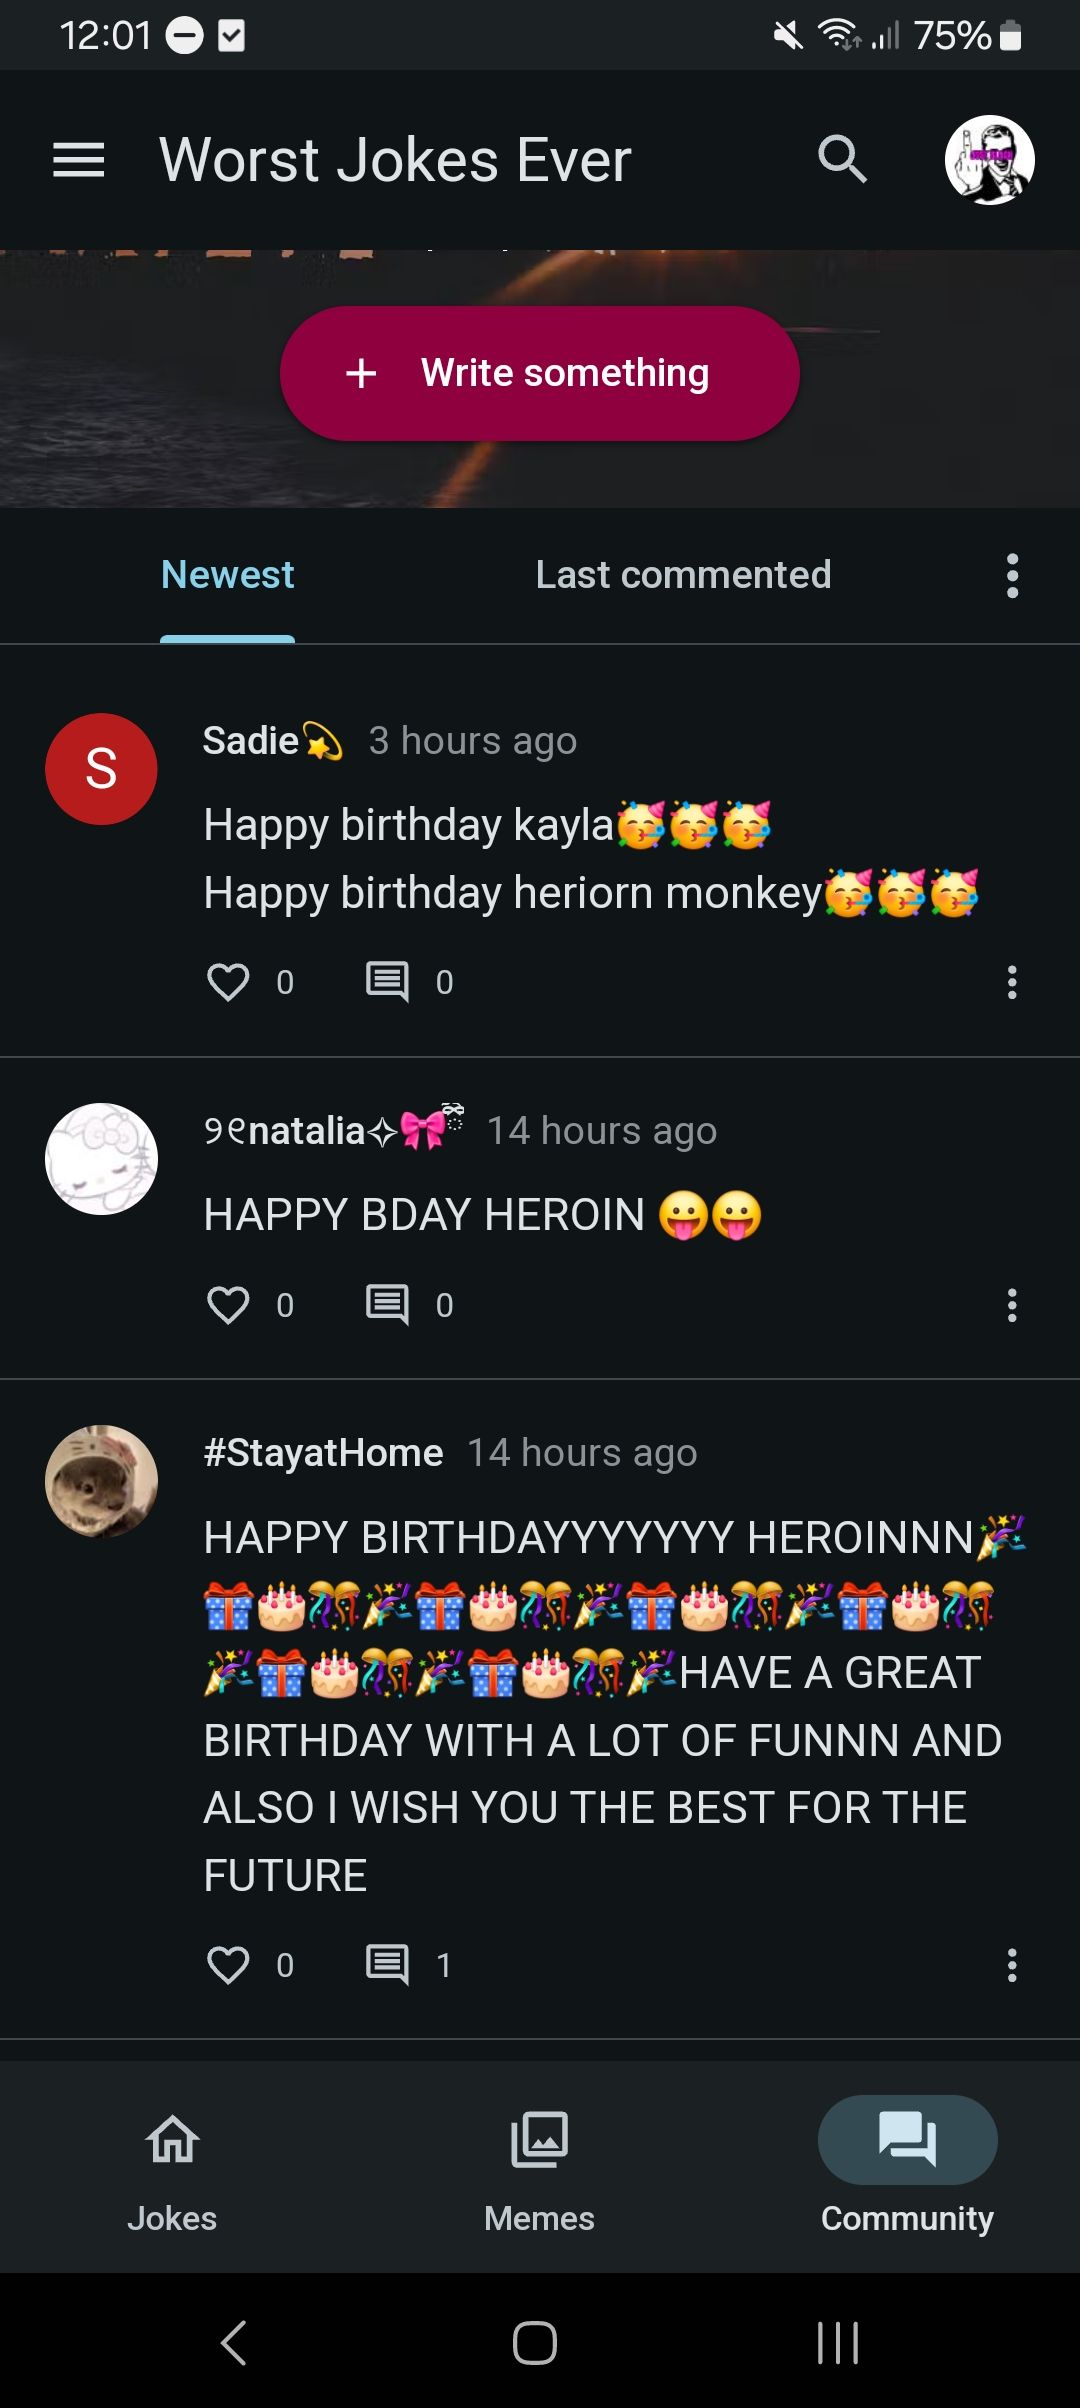 12:01
= Worst Jokes Ever
.ill 75%
S
Newest
+ Write something
Last commented
Sadie 3 hours ago
Happy birthday kayla
Happy birthday heriorn monkey
0
9enatalia
14 hours ago
HAPPY BDAY HEROIN
0
0
#StayatHome 14 hours ago
HAPPY BIRTHDAYYYYYYY HEROINNN;
HAVE A GREAT
BIRTHDAY WITH A LOT OF FUNNN AND
ALSO I WISH YOU THE BEST FOR THE
FUTURE
0 E 1
Jokes
Memes
Community
|||